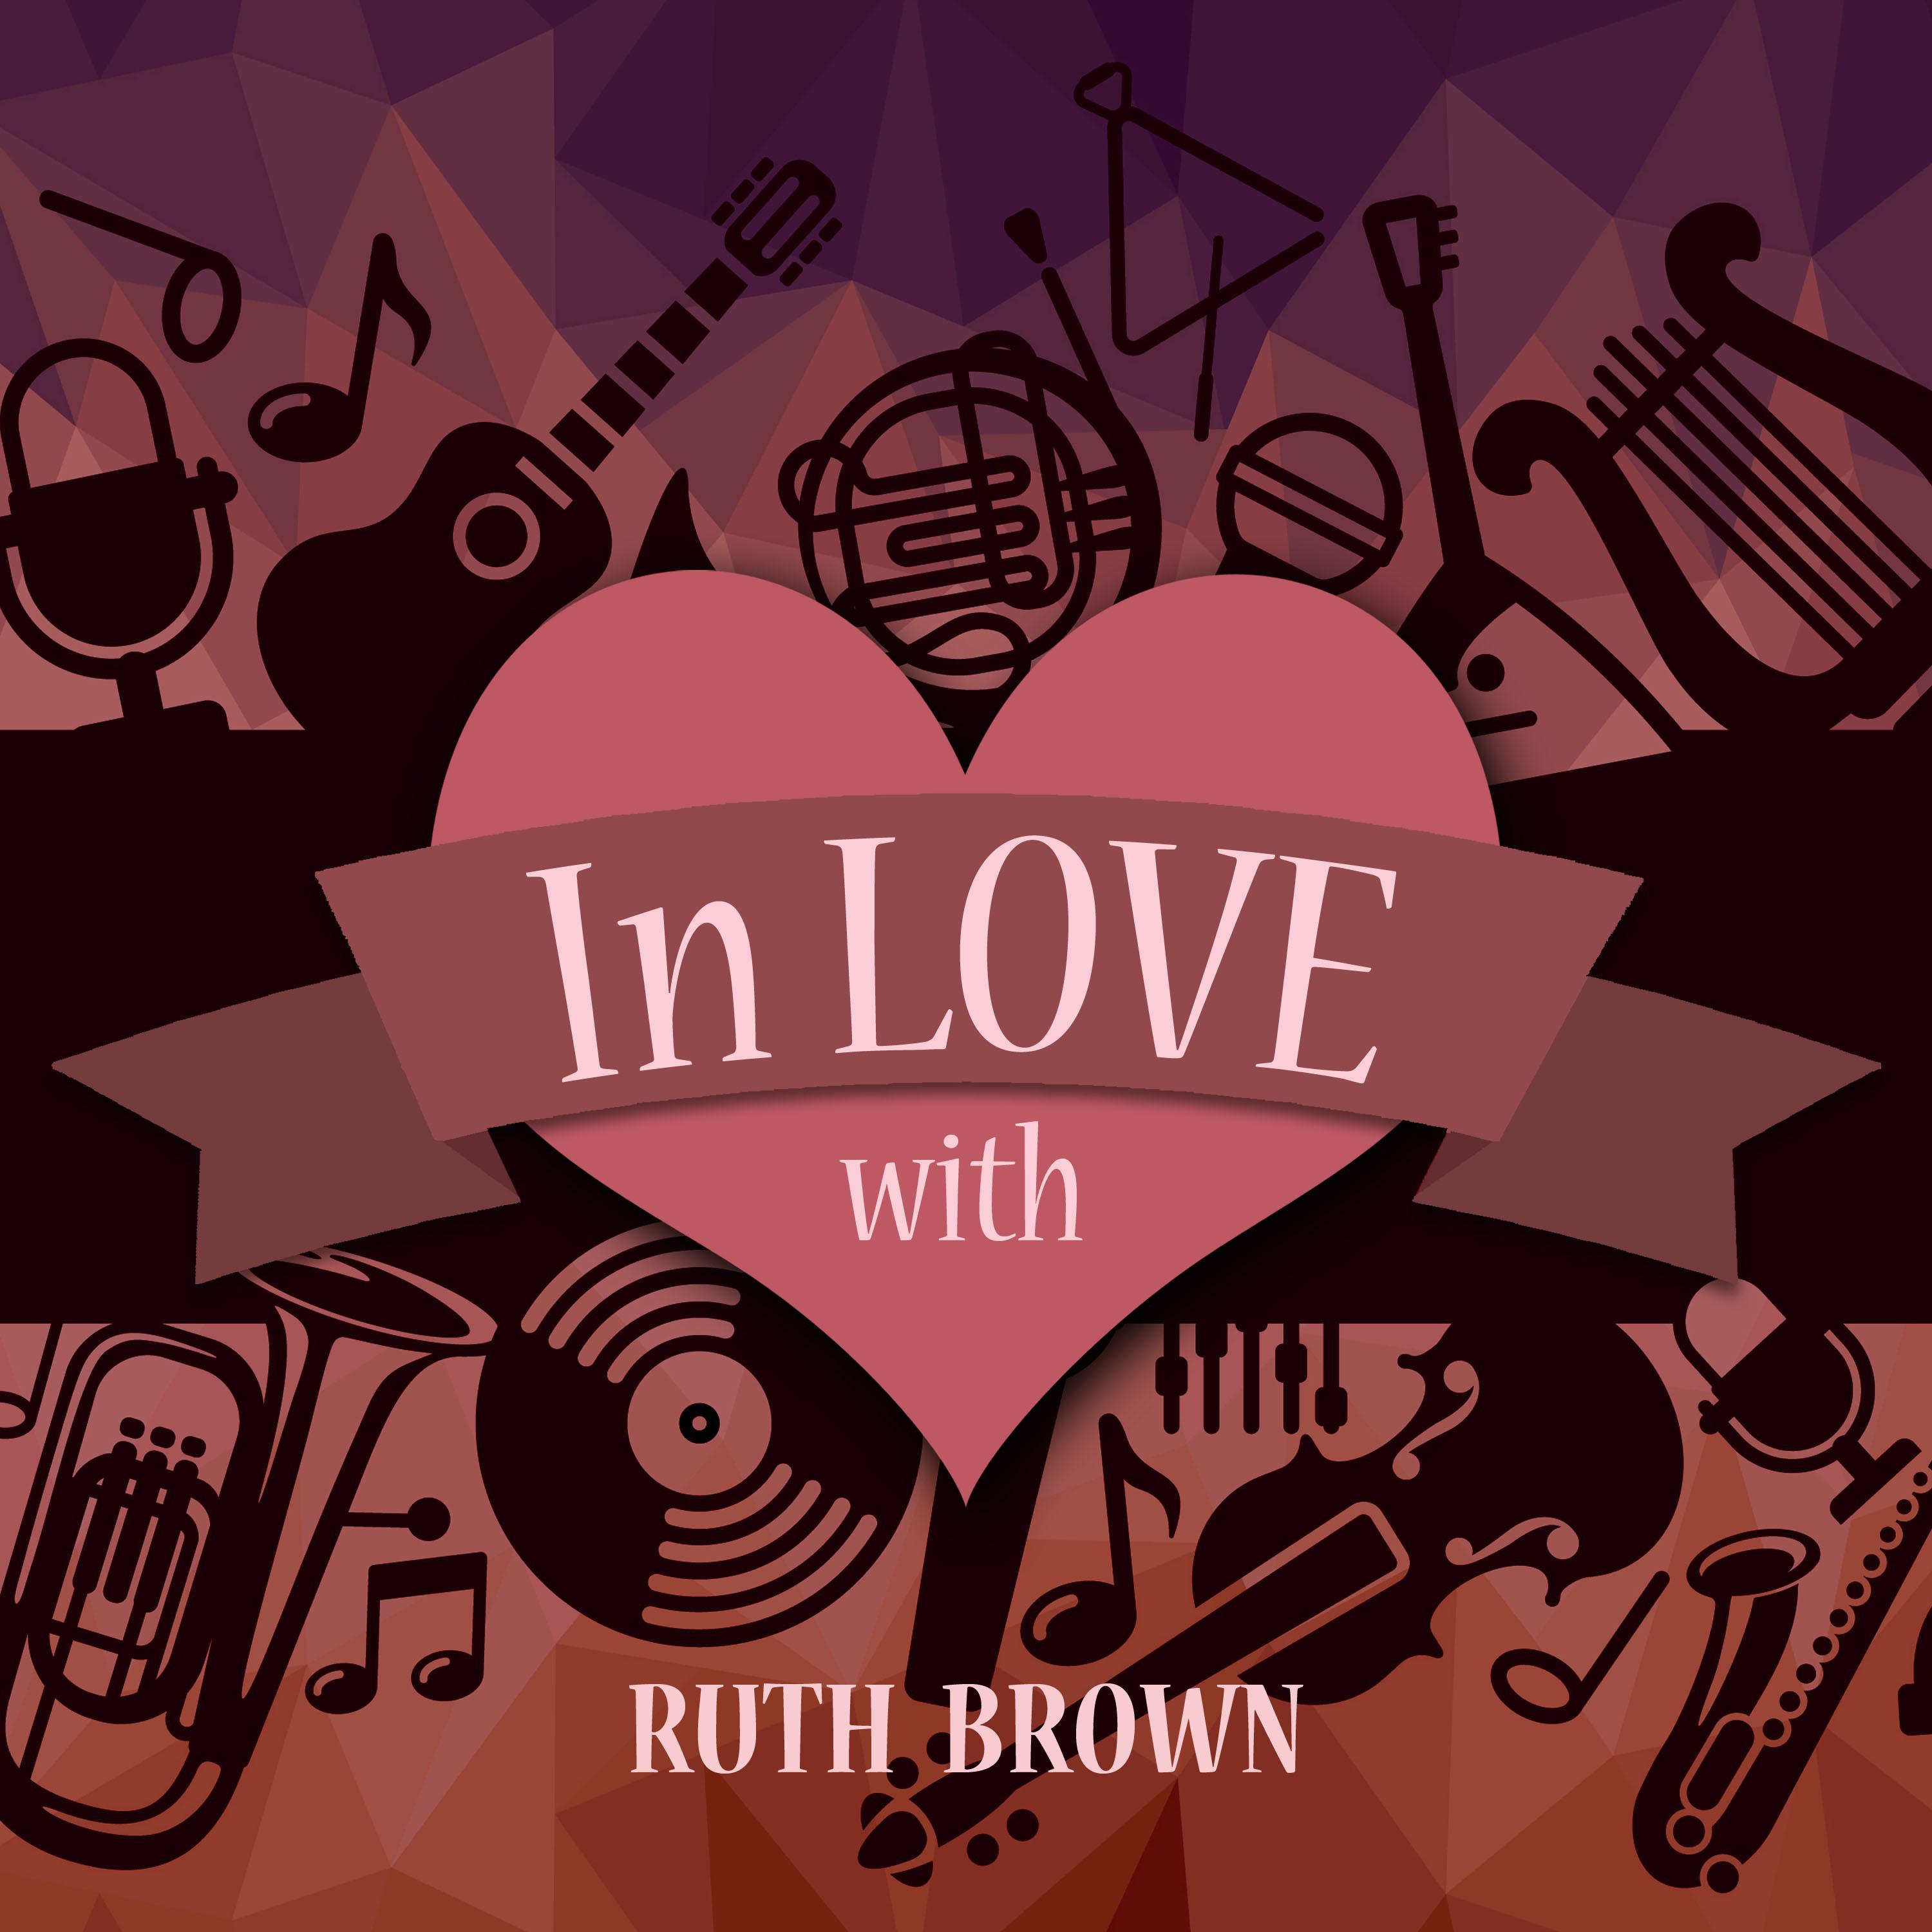 In Love with Ruth Brown